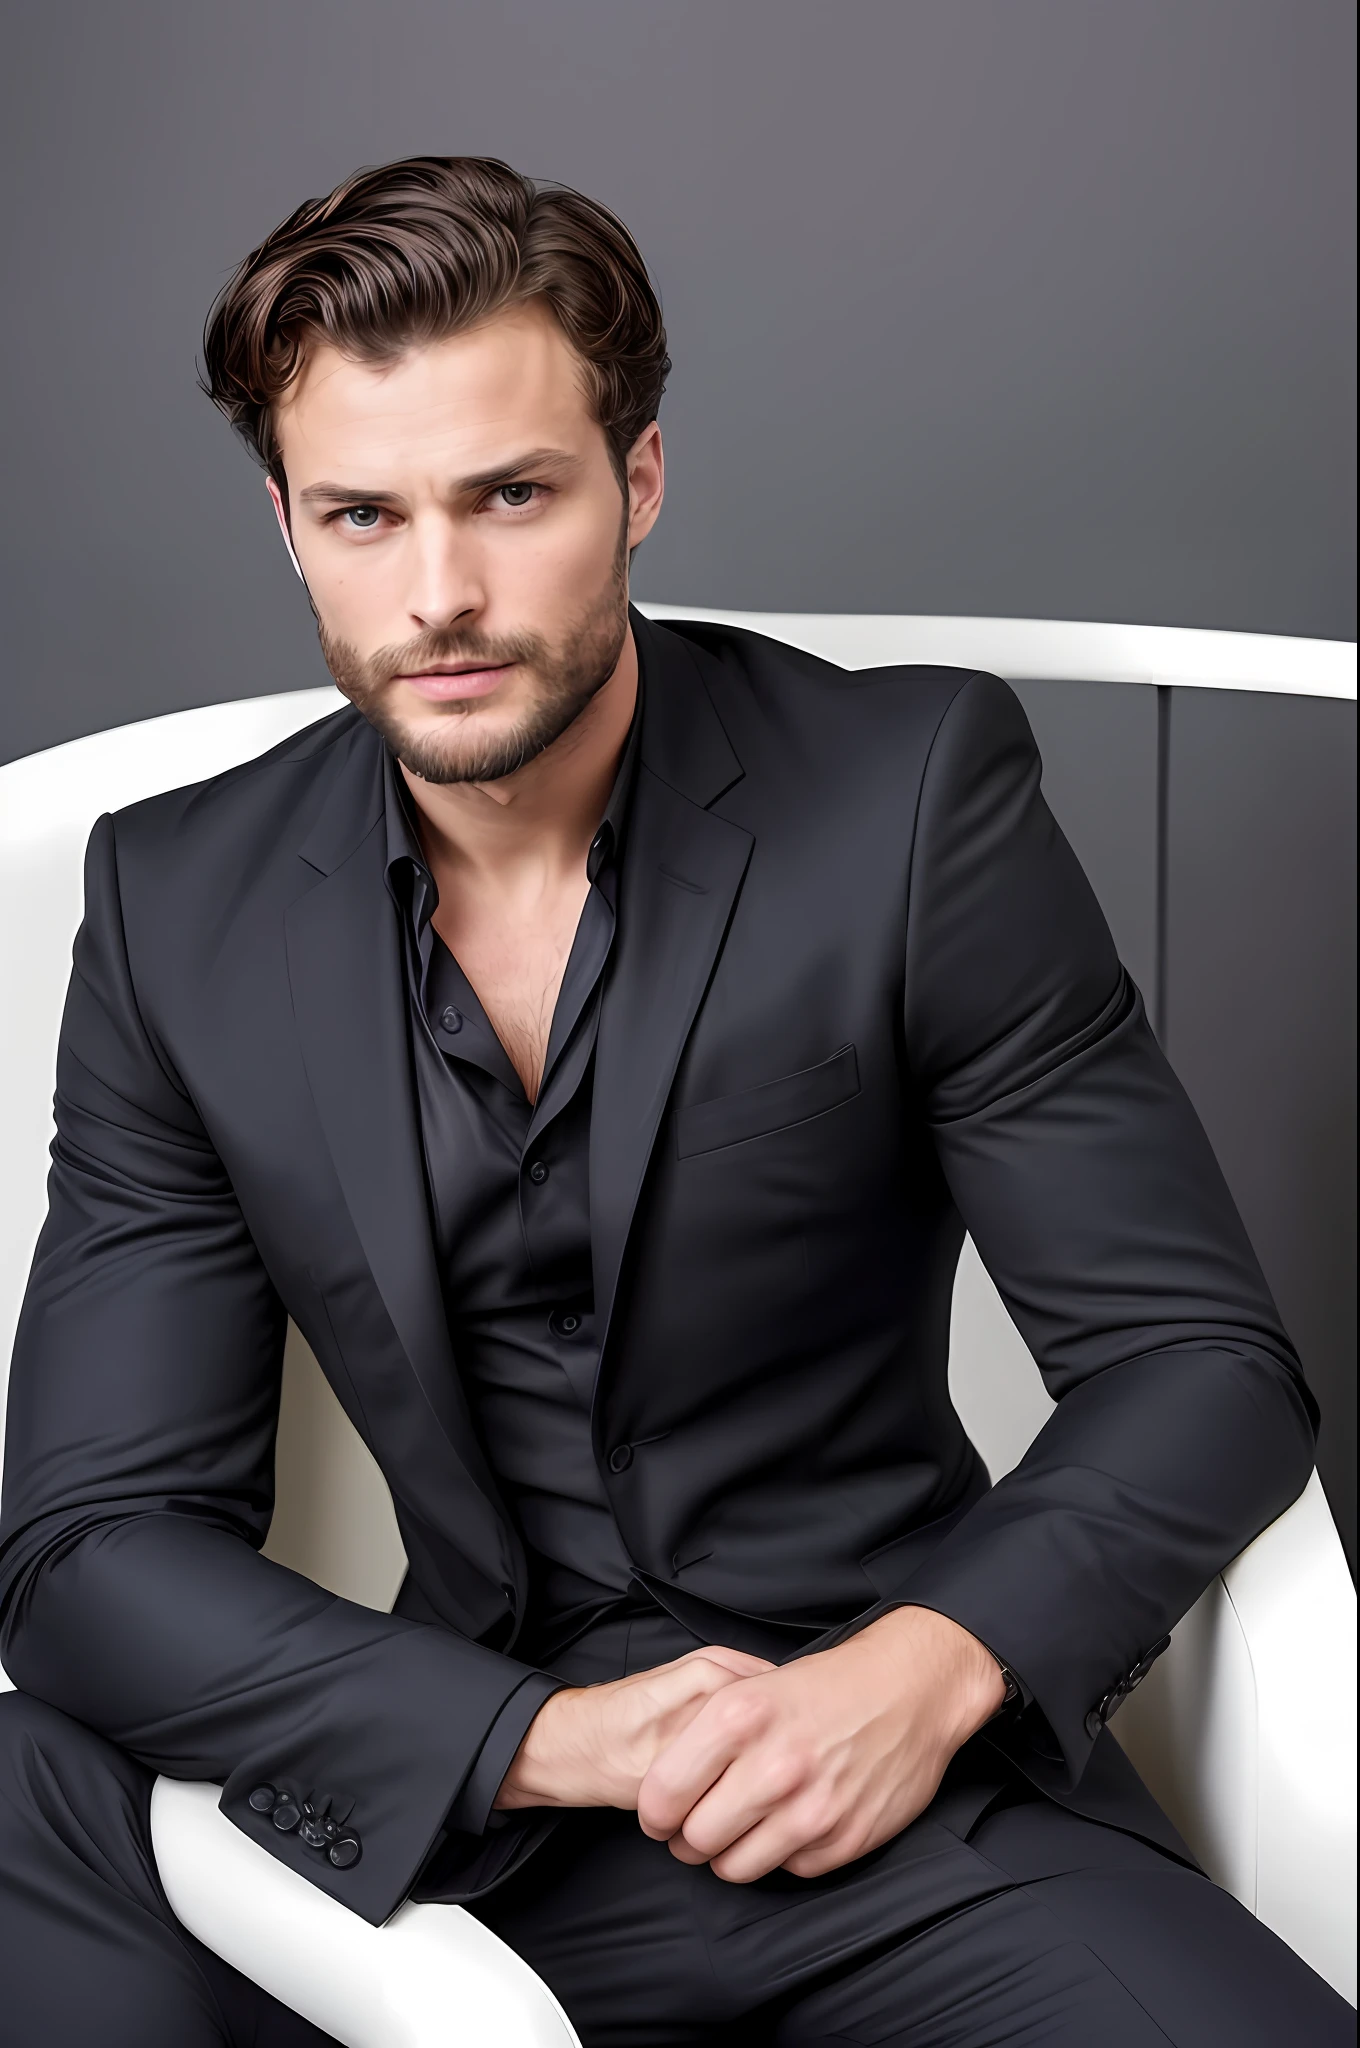 ((half body)) RAW Photo Ceo man sitting in an office chair, wearing black suit, (Using dark and attractive beard) movie scene, (Impeccable) ,Serious and elegant man, Actor Jamie Dornan, with thick male eyebrows, secret agent 007 man style, (with mysterious and serious face,) short dark hair, dark black background image,elegant and elegant, Man similar to actor Jamie Dornan,  ( high quality and realistic image), ((Best Quality, 8k, Masterpiece).